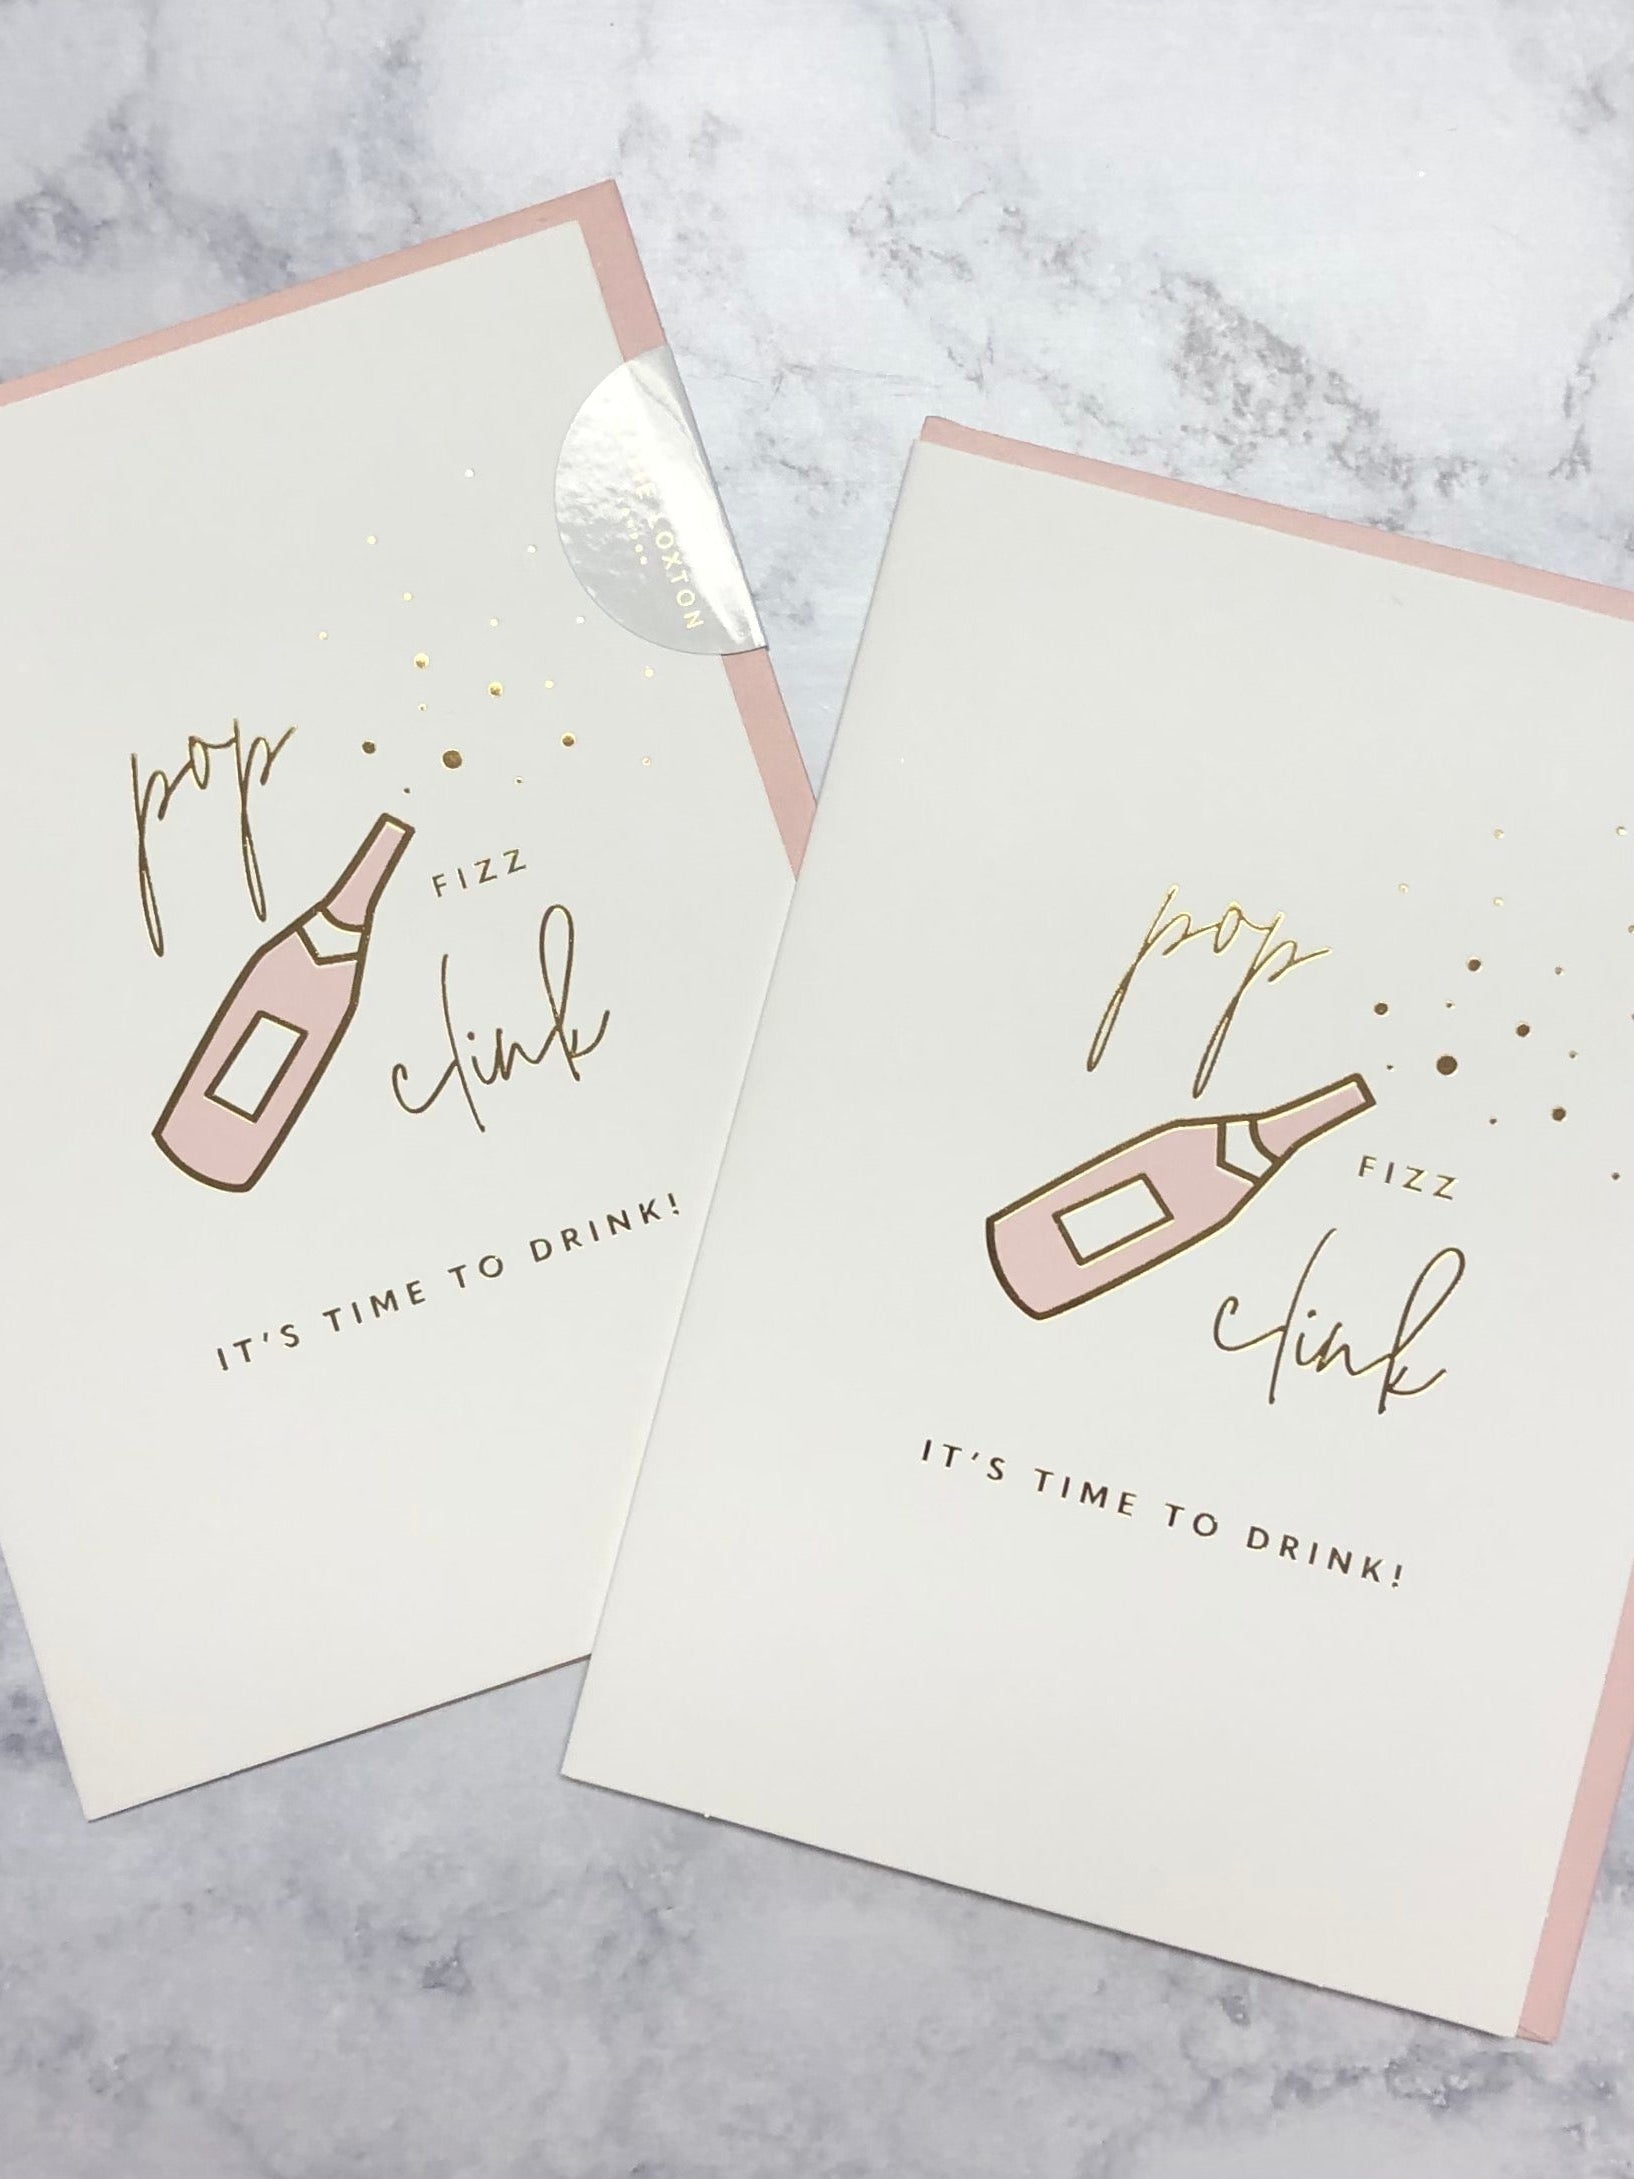 KL Pop Fizz Clink, It's Time To Drink Greeting Card